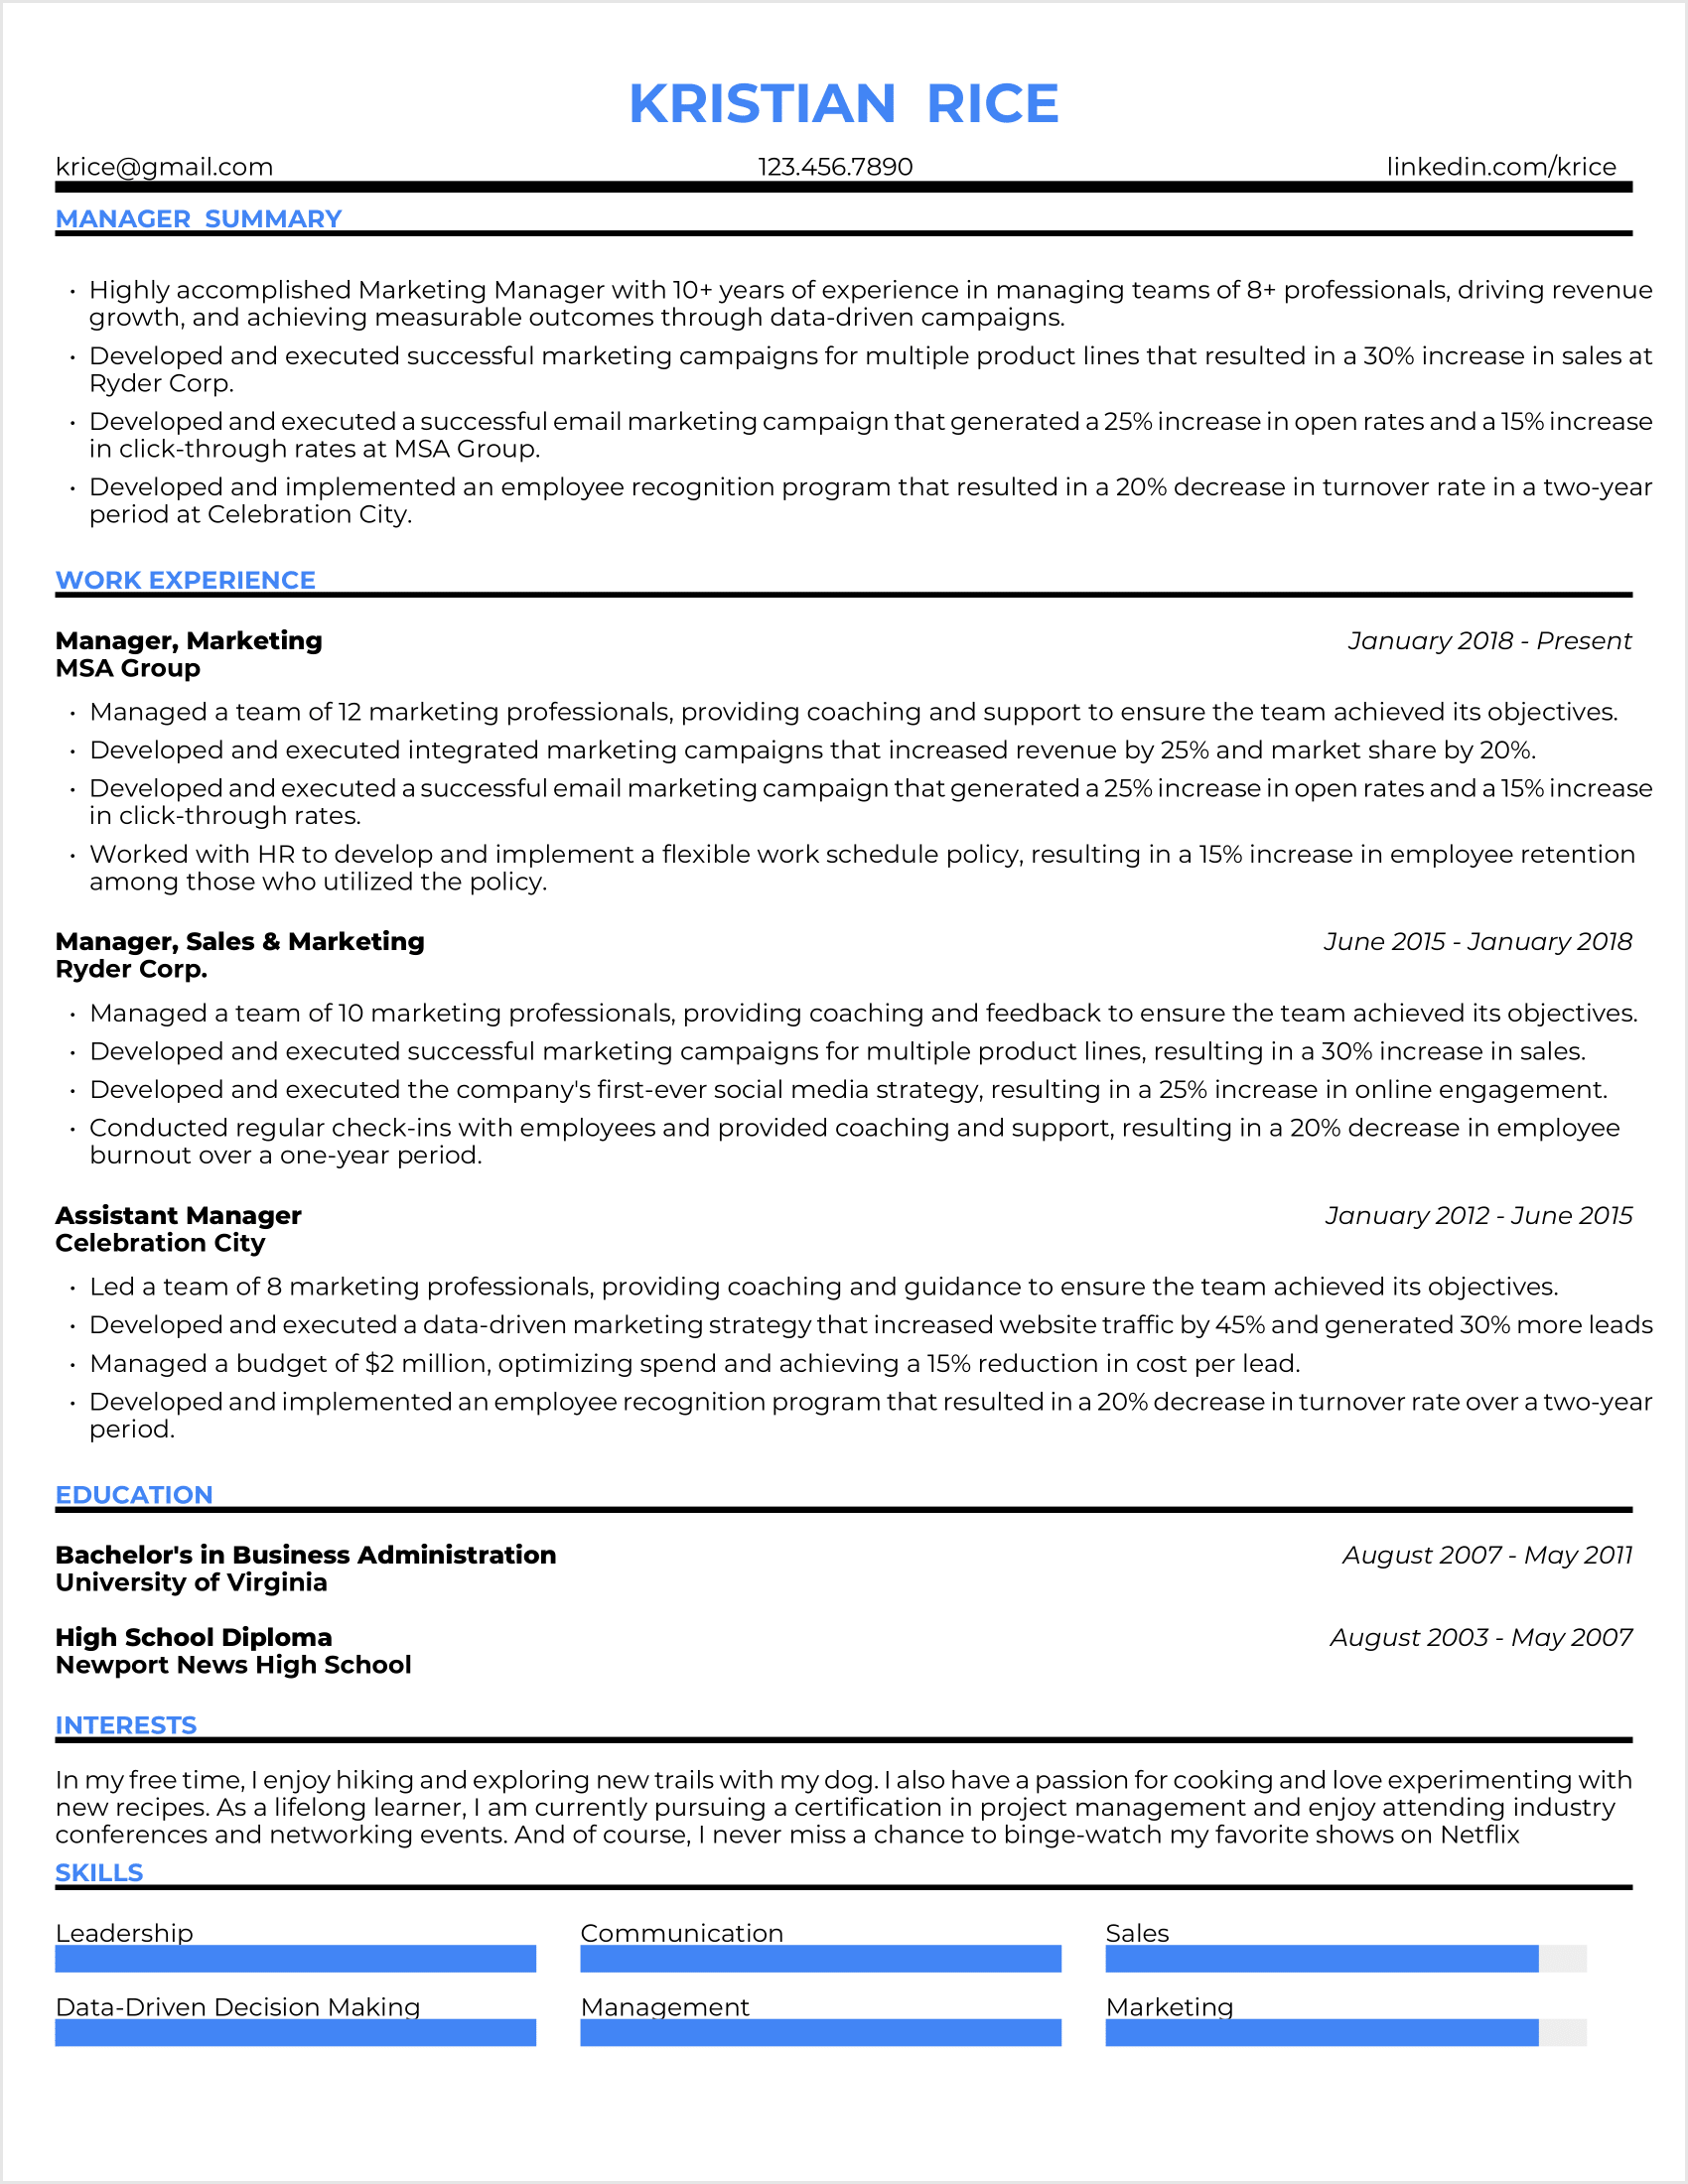 Manager Resume Example #1